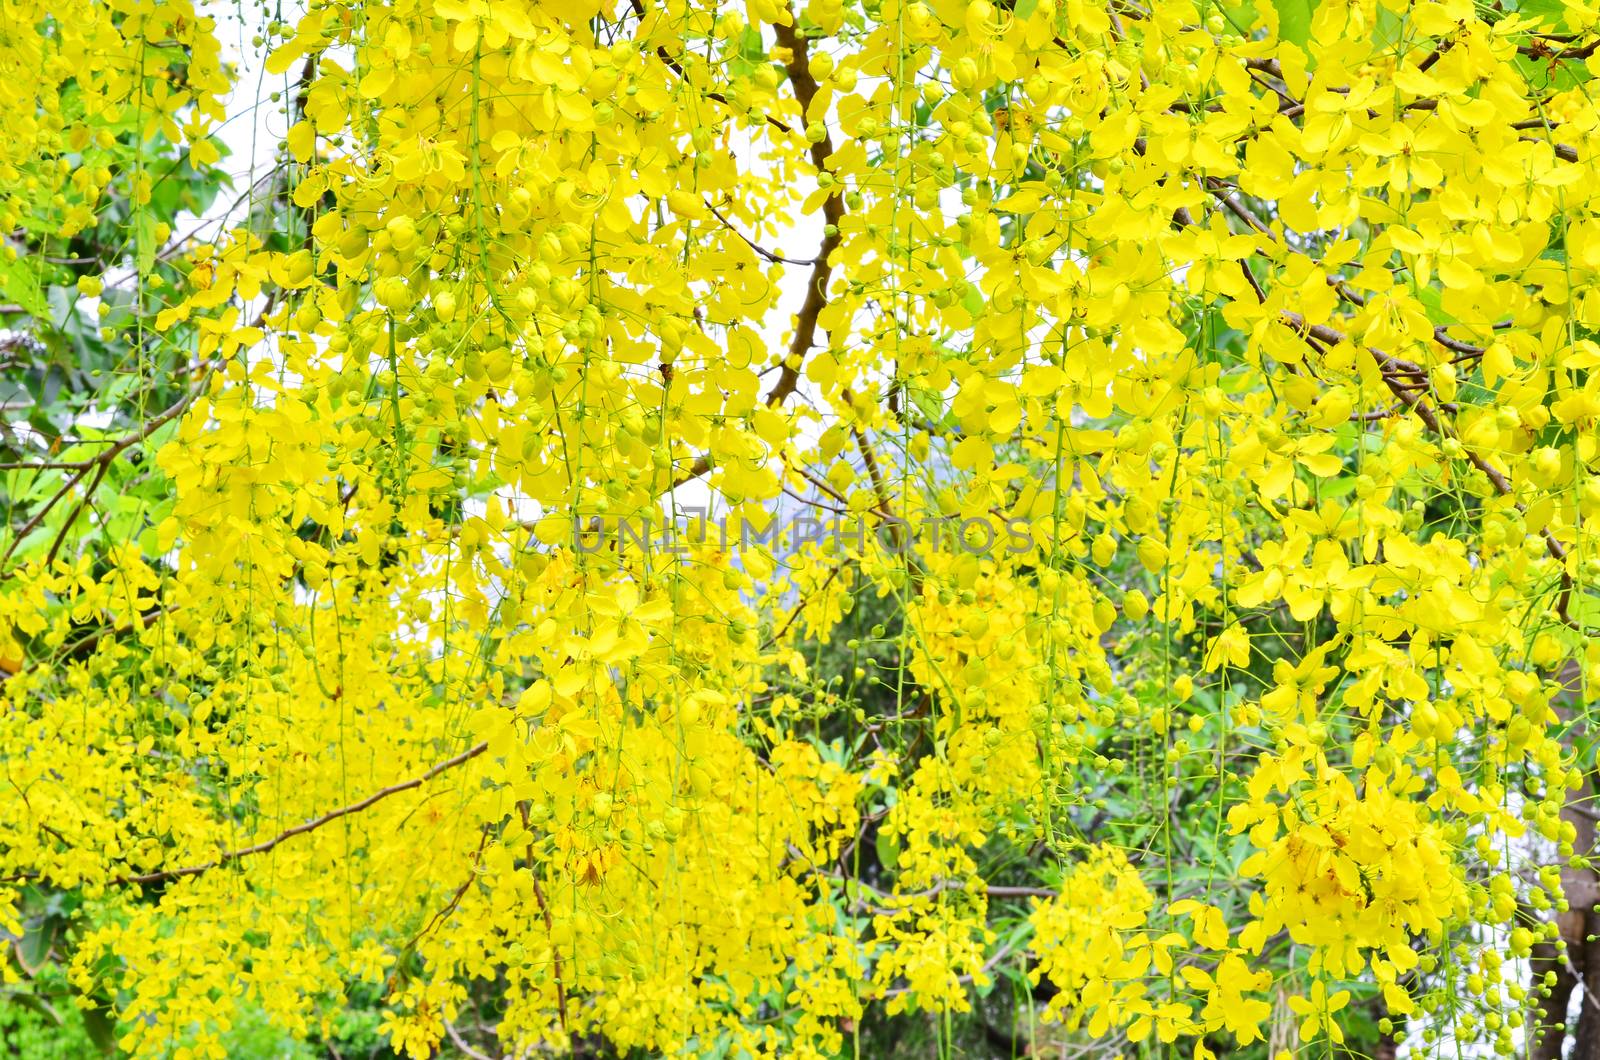 Yellow flowers hanging on a tree in the middle of nature